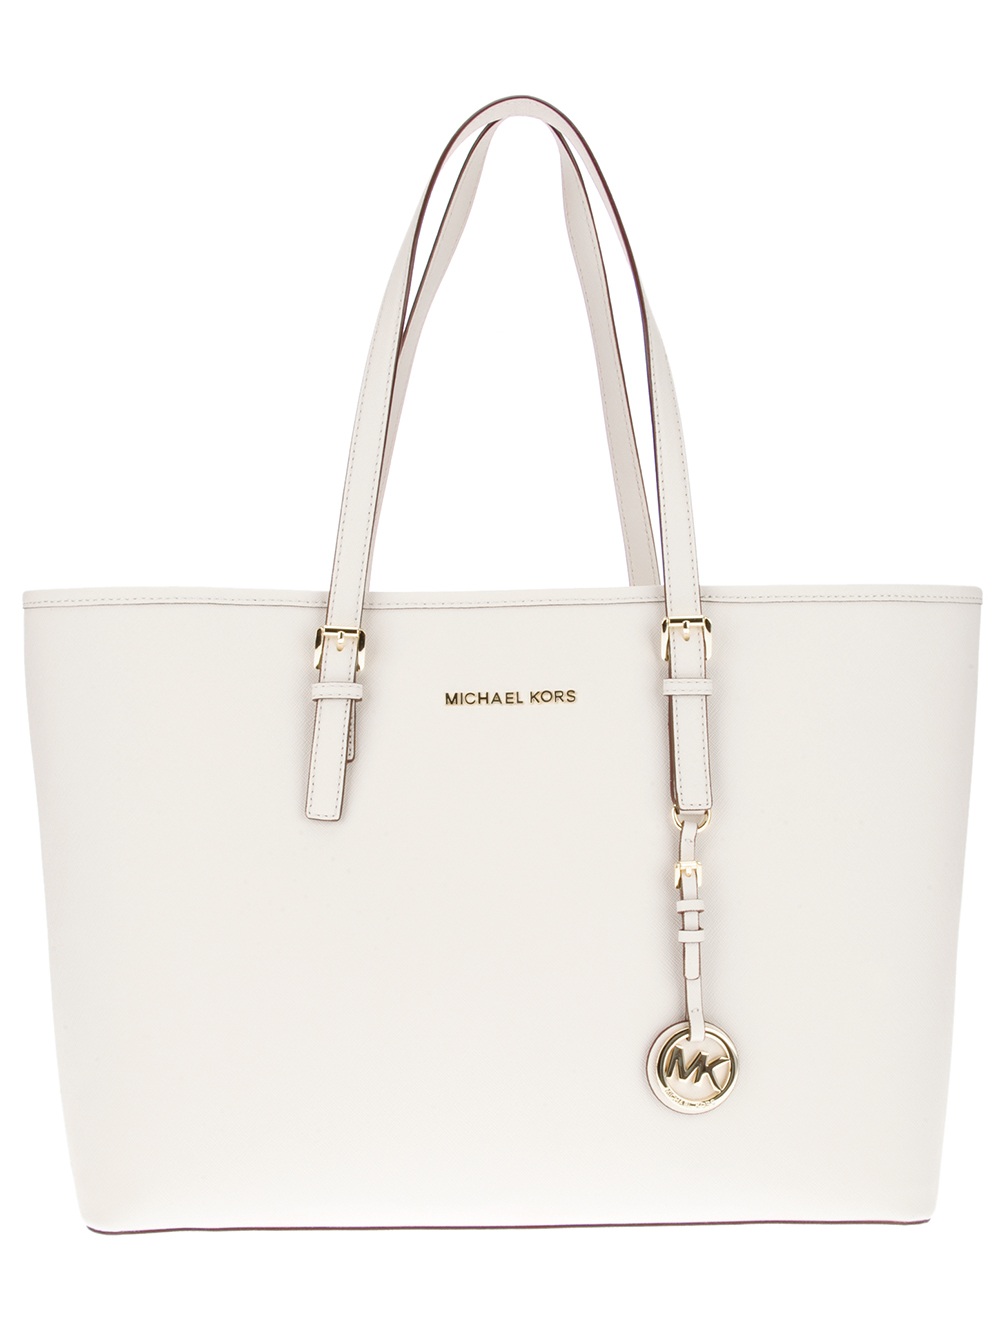 Michael Kors: Bags for Spring 2013th ~ The Simply Luxurious Life Style